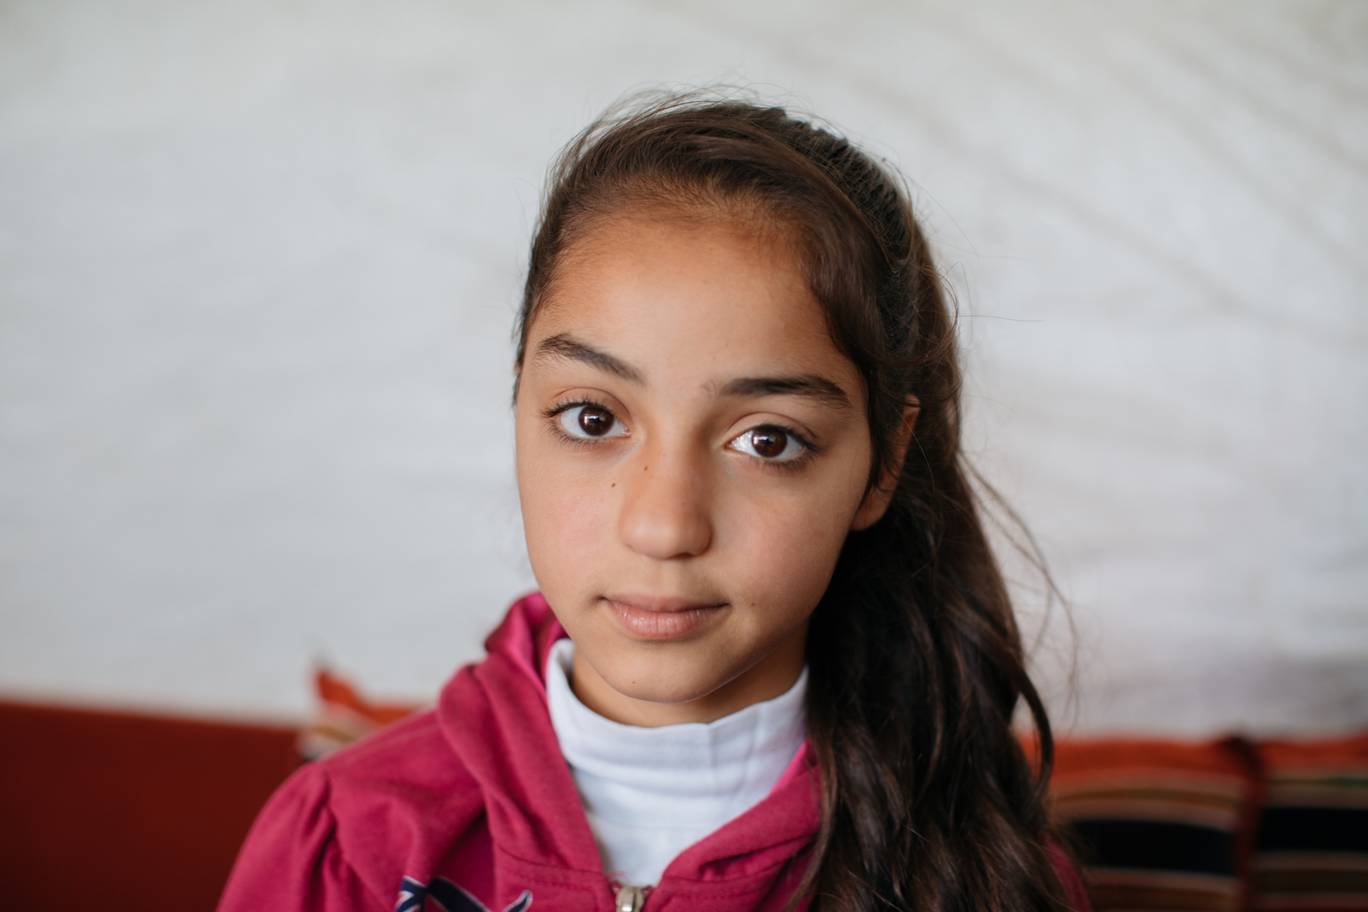 Sara, 11, is a Syrian refugee living in Lebanon’s Bekaa Valley in an informal tented settlement. She attends UNRWA-funded Jefna school where she is top of her class and regarded as the brightest child in the school by her teachers - Photo by Paddy Dowling